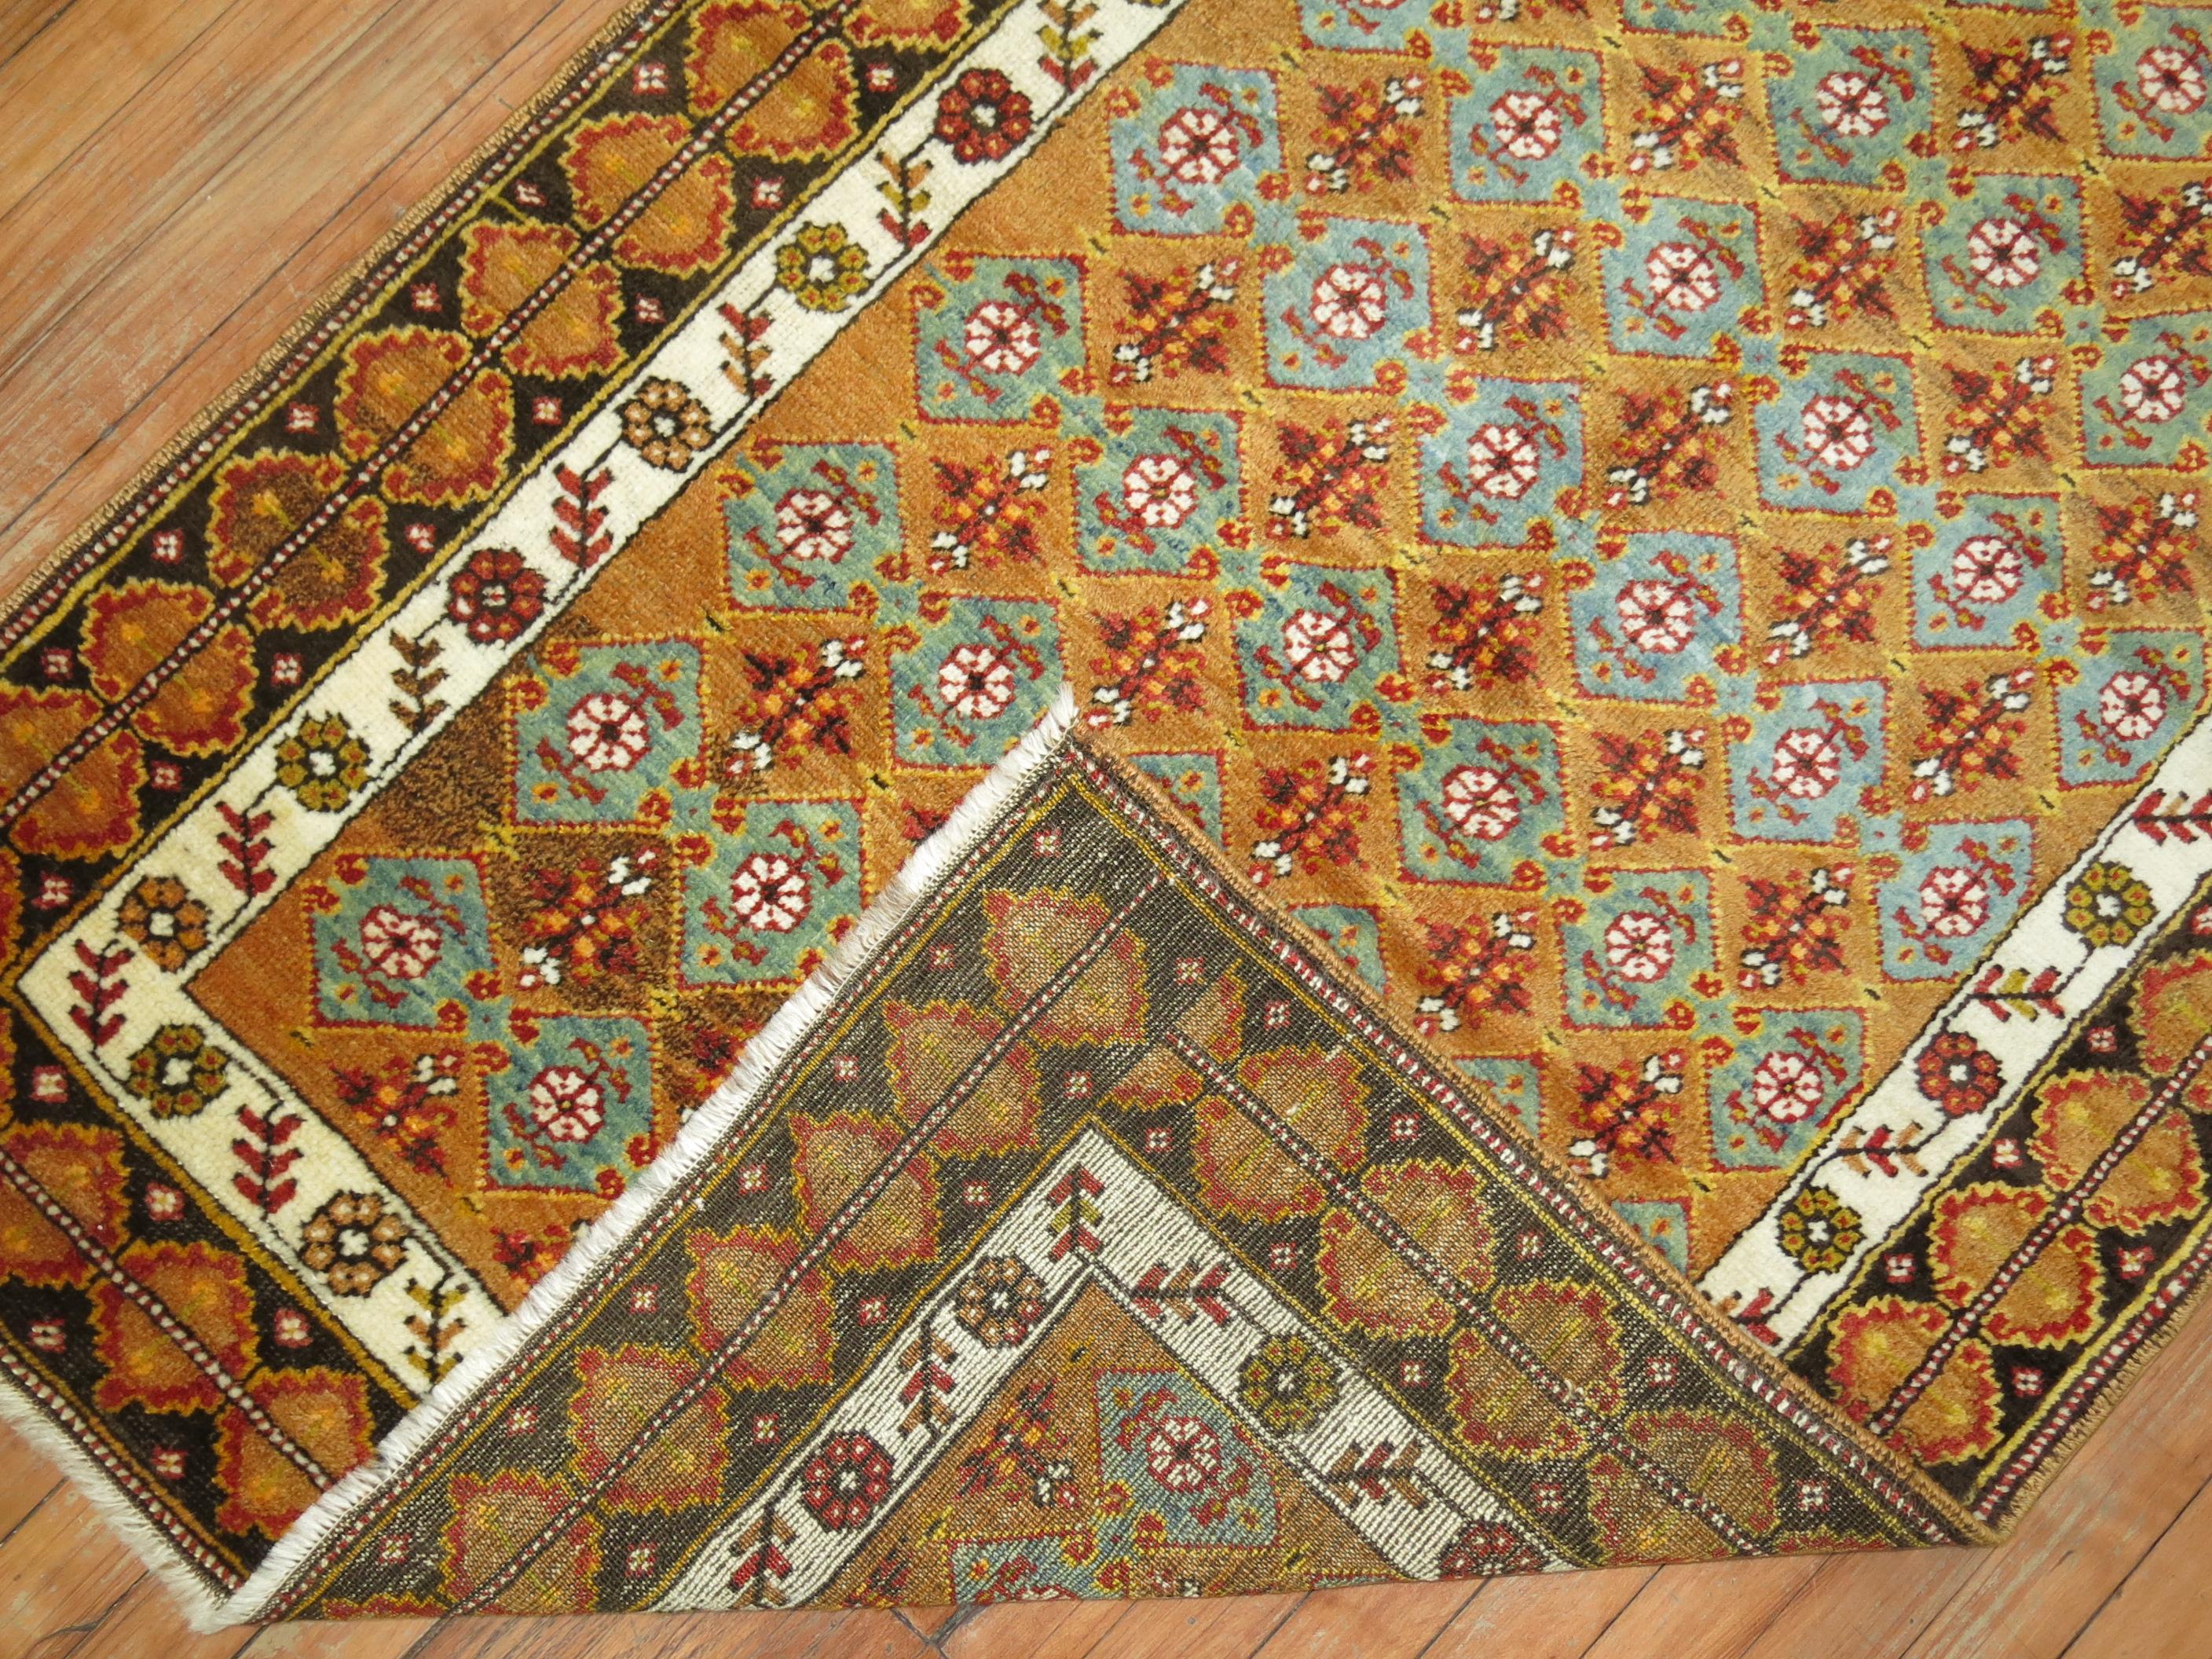 A pair of fine Turkish runners from the 1st quarter of the 20th century.

Measuring: 3'4'' x 9'10'' and 3'4'' x 10' respectively.
 